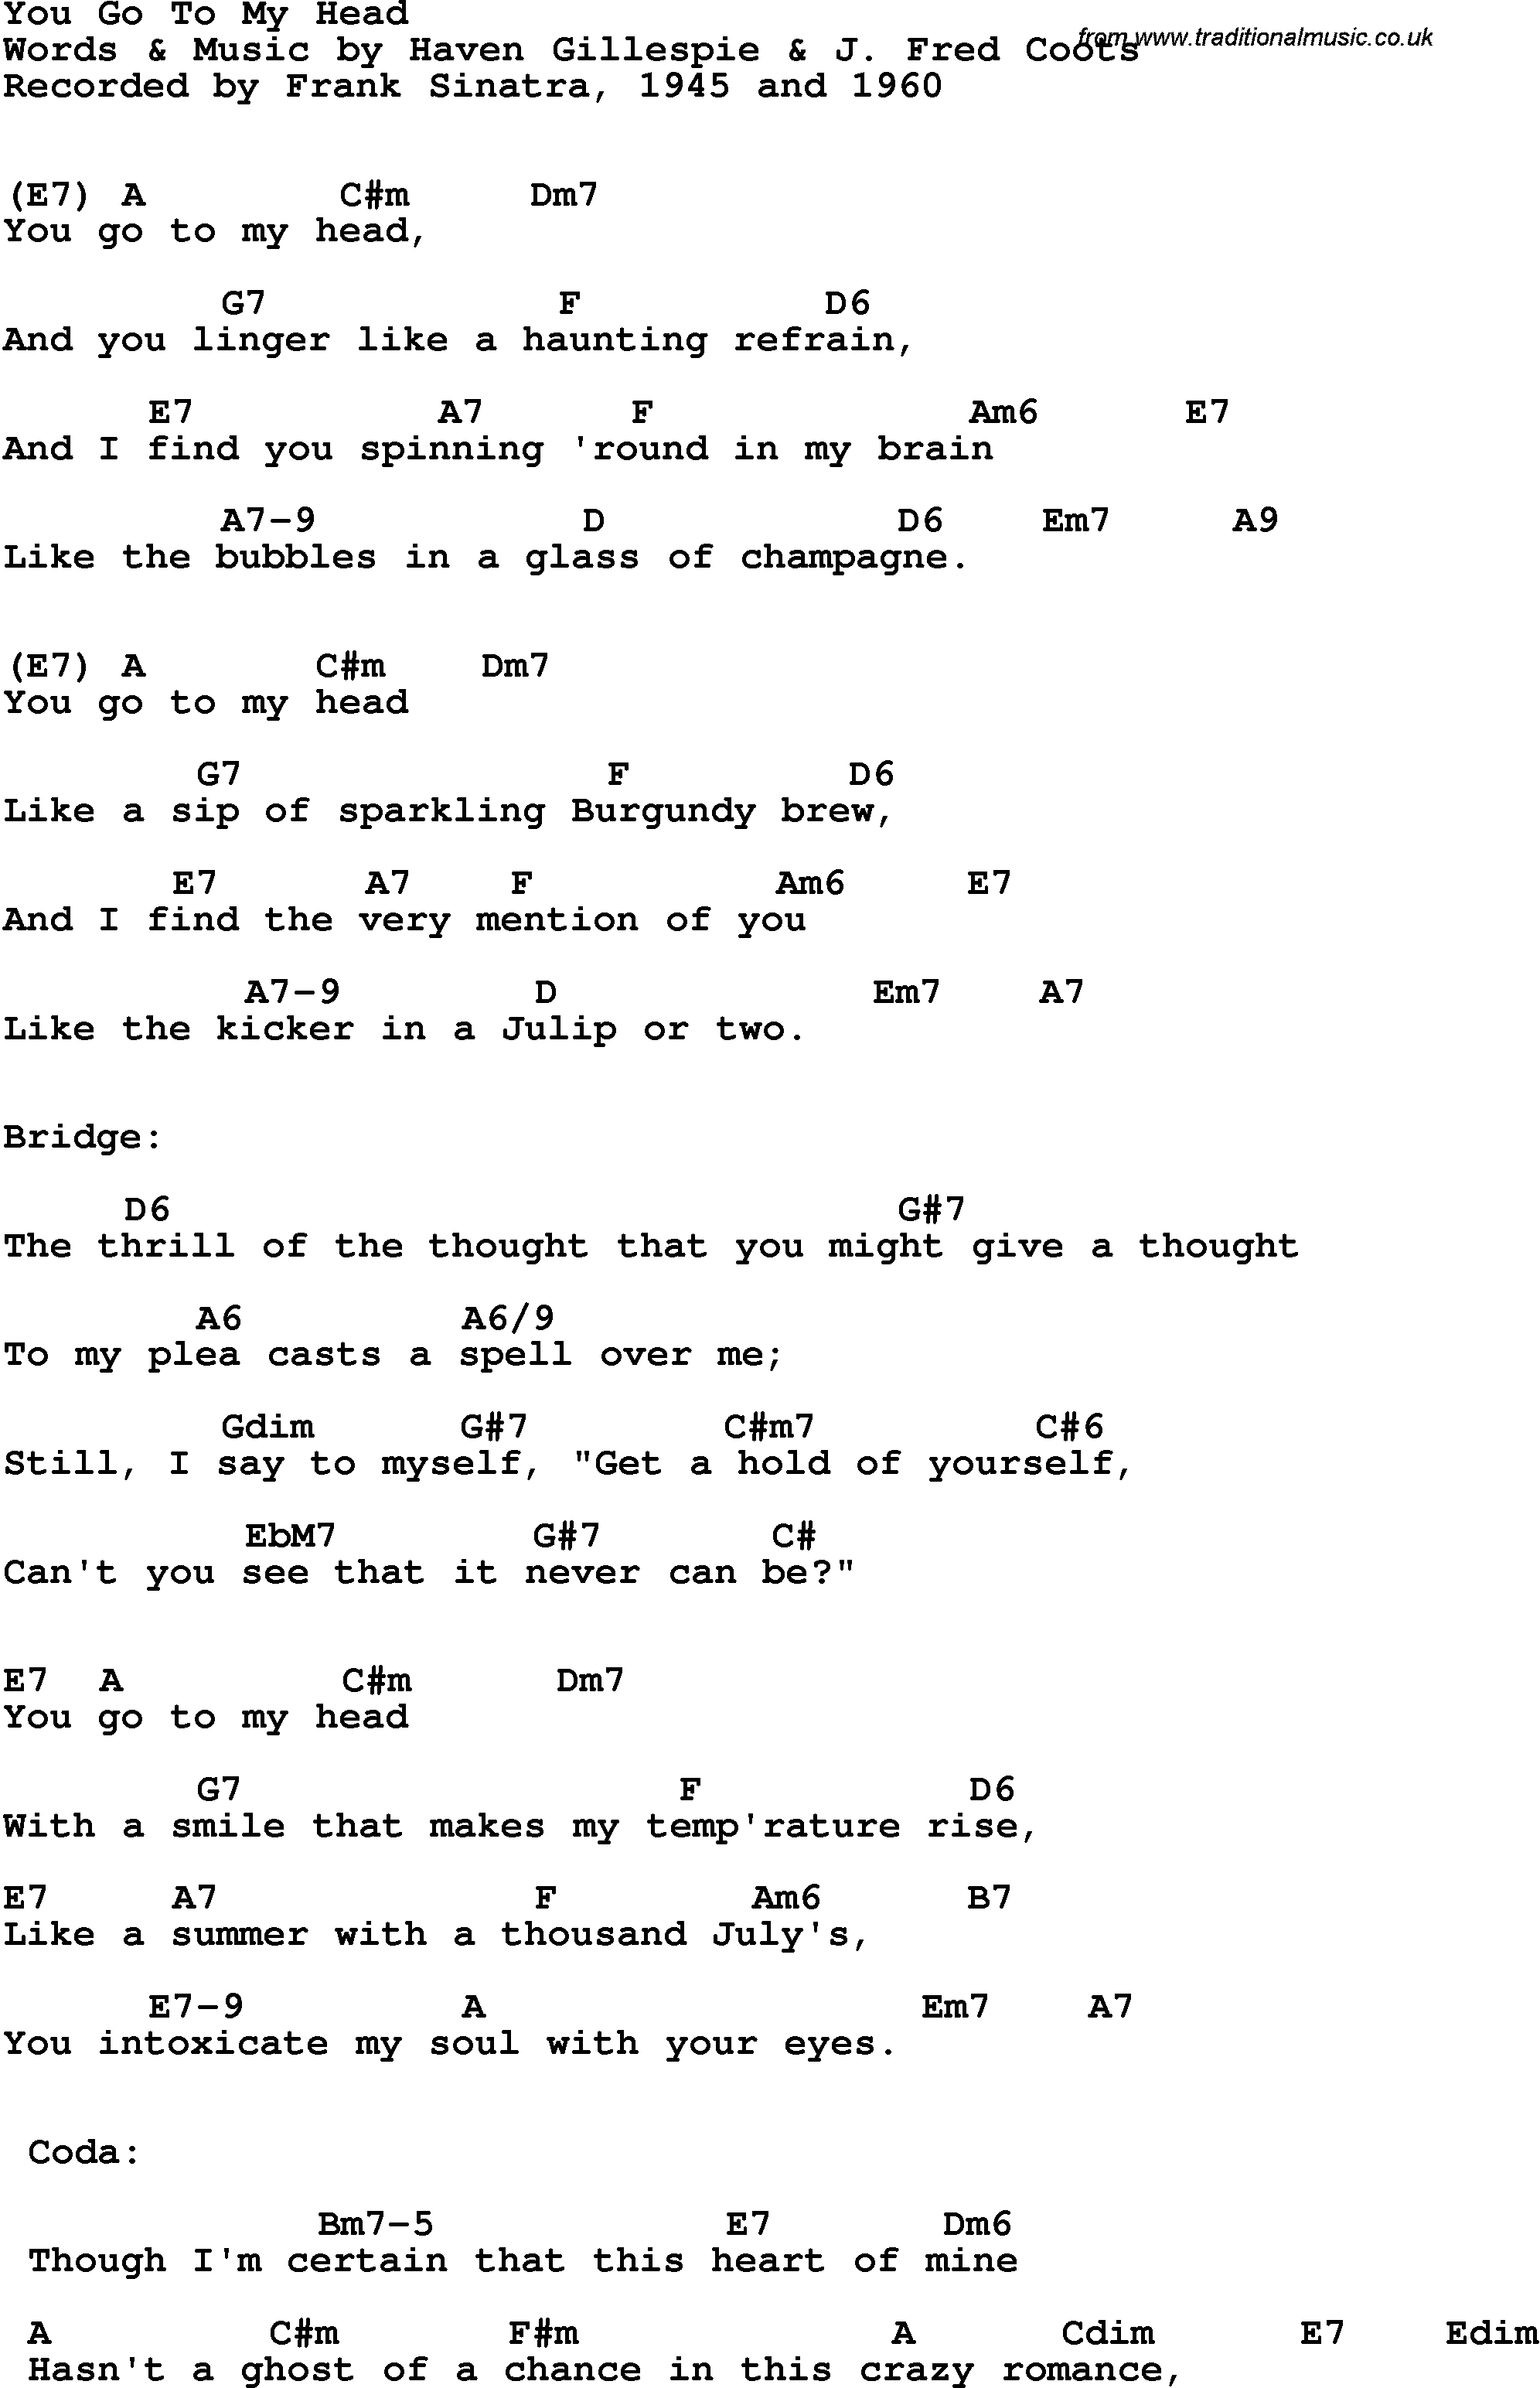 Song Lyrics with guitar chords for You Go To My Head - Frank Sinatra, 1945